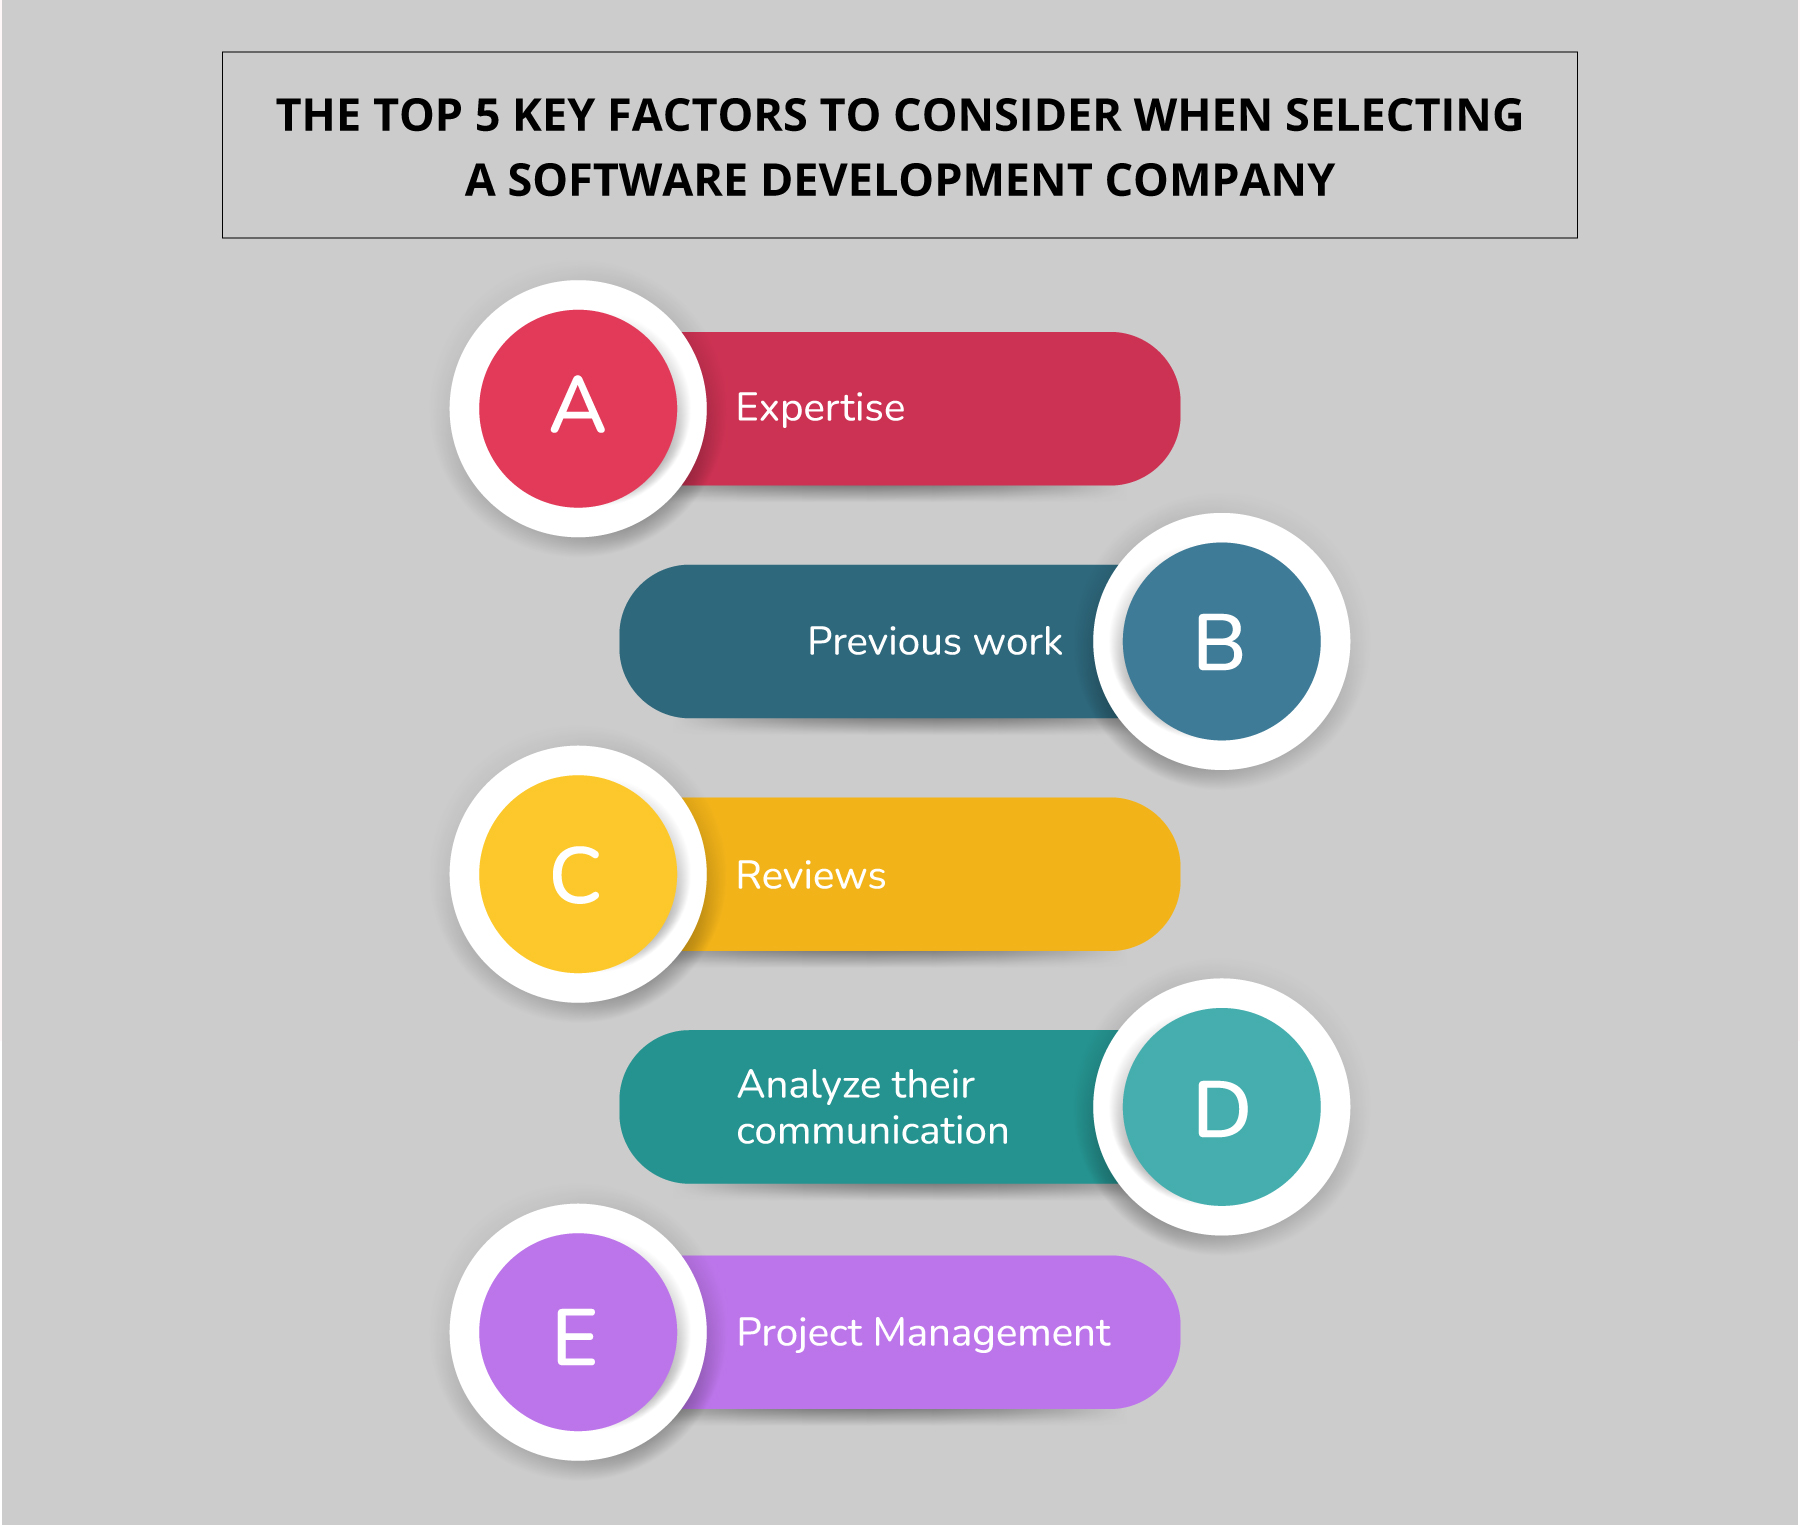 Top 5 key factors to consider when selecting a Software Development Company